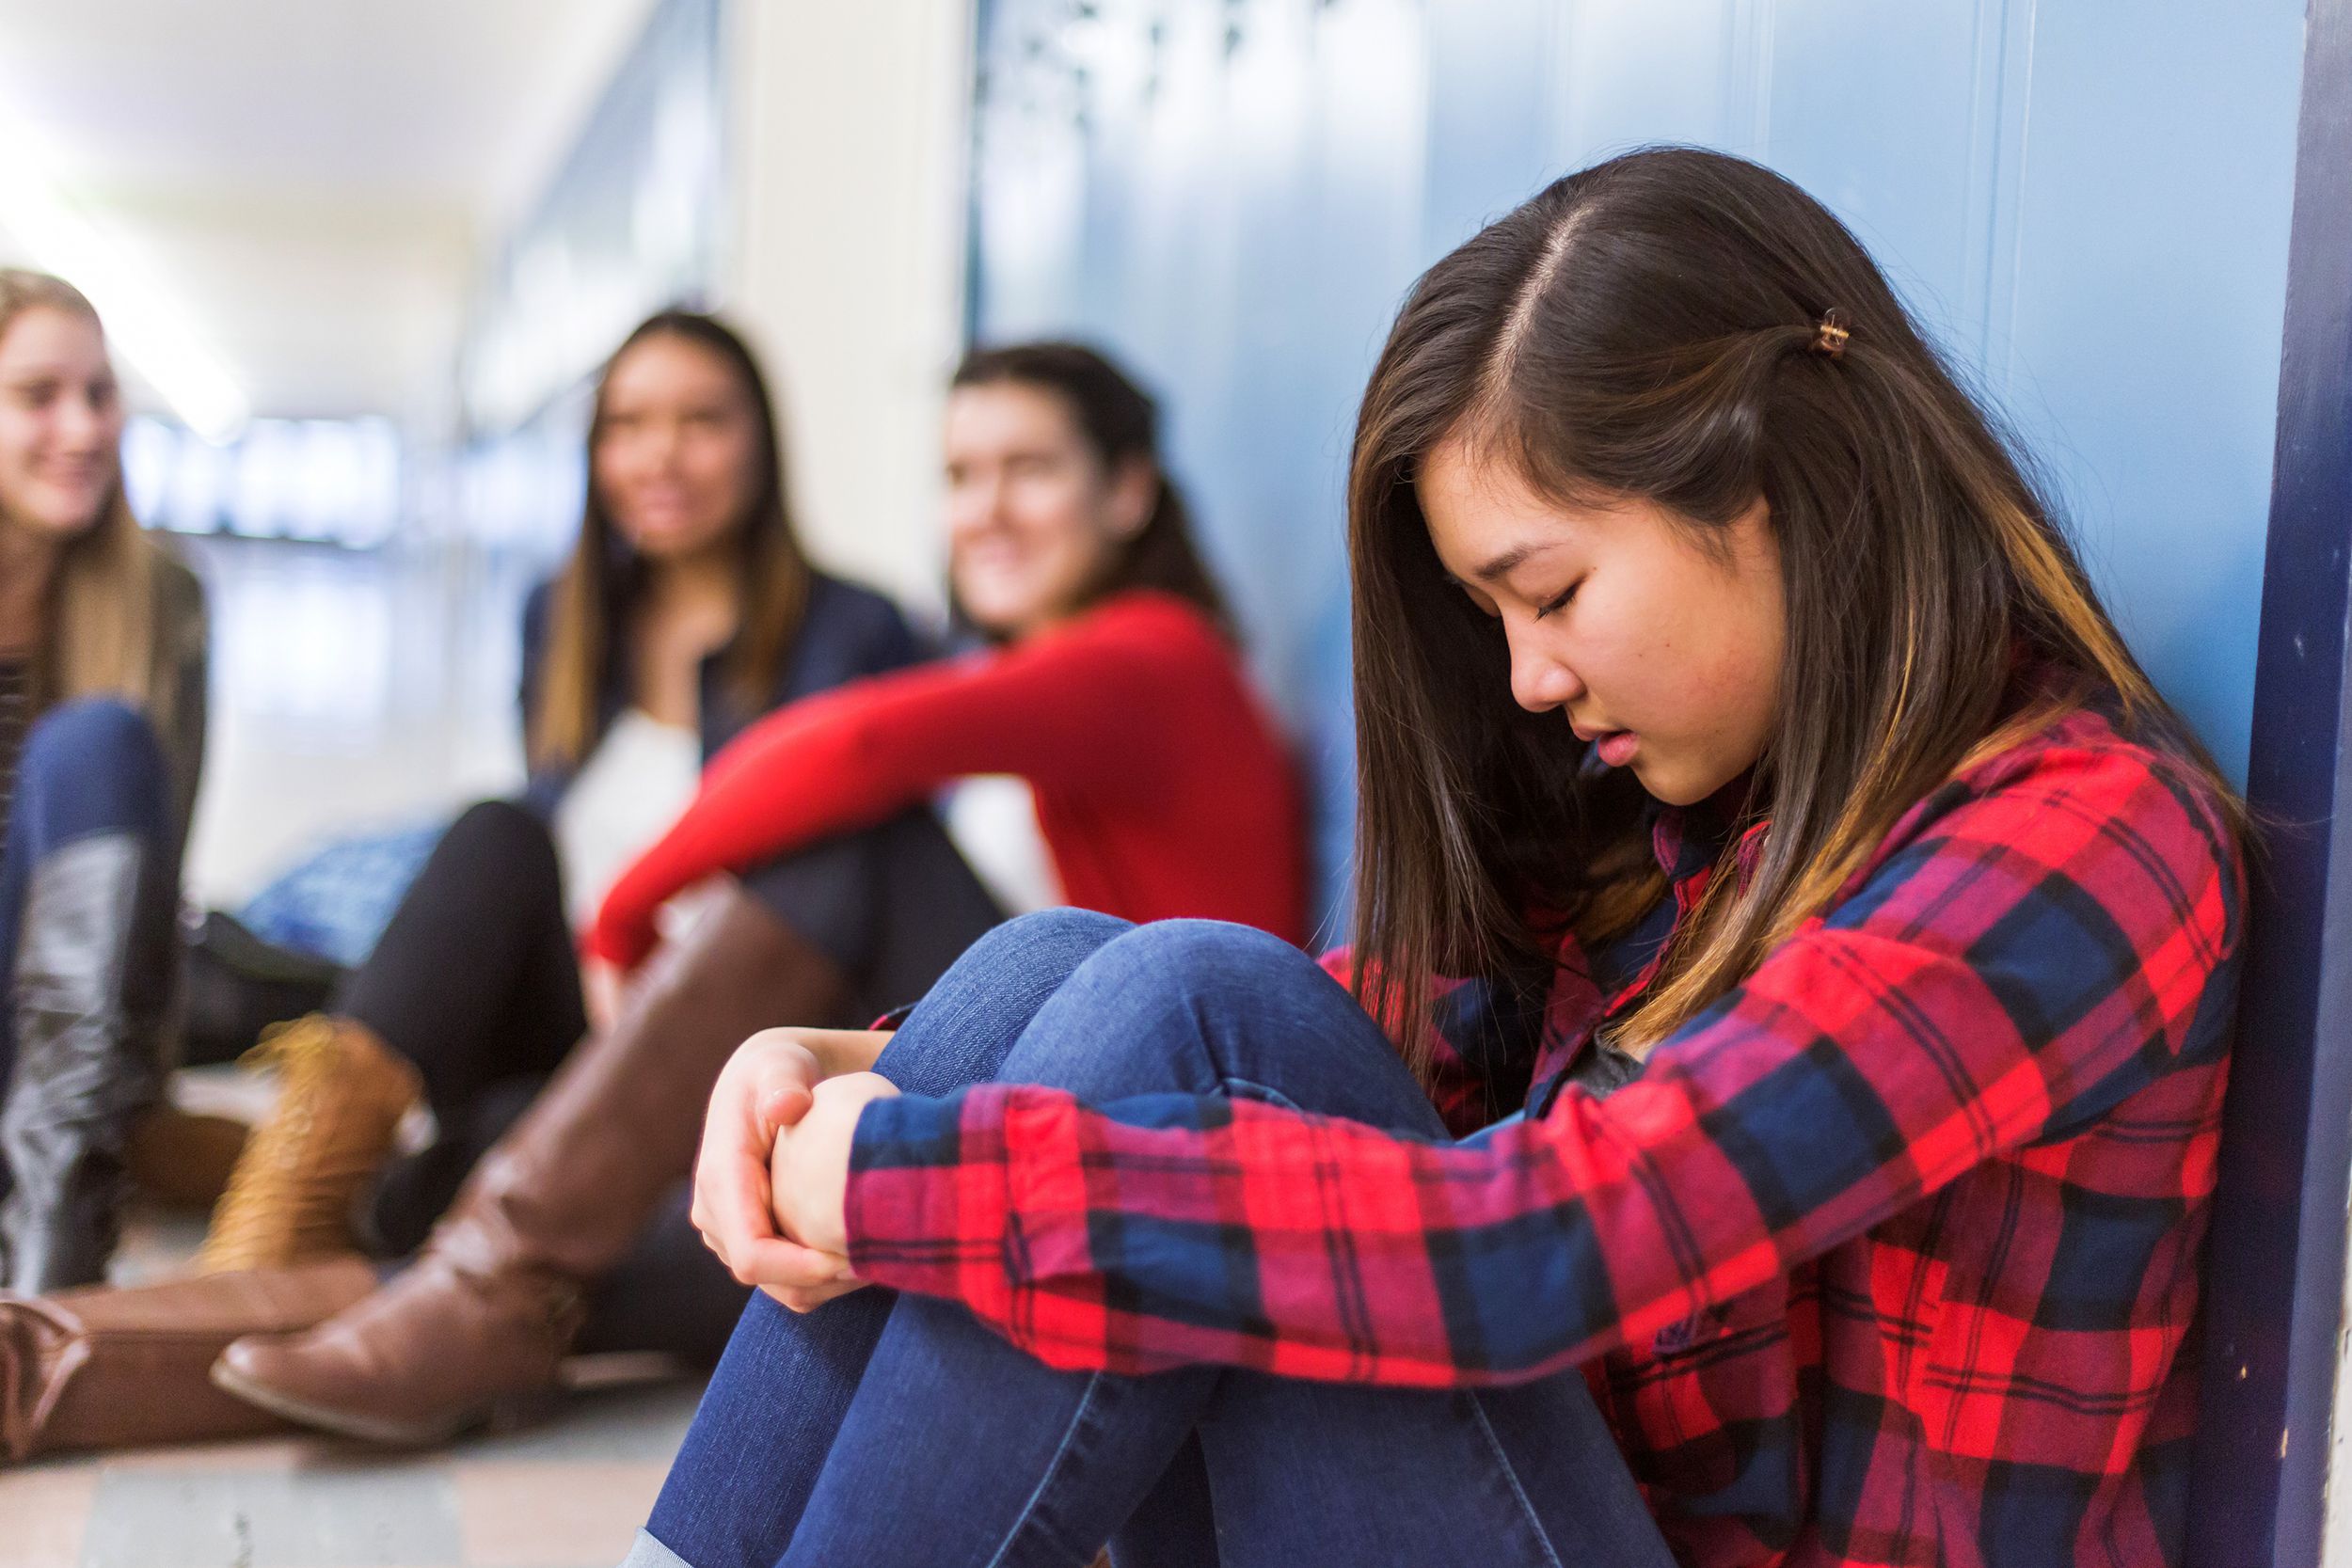 <p>Sadly, the majority of the world's youth are exposed to bullying in some way. According to the <a href="https://nces.ed.gov/pubs2013/2013329.pdf">U.S. Department of Education</a>, between 1 in 4 and 1 in 3 U.S. students are bullied, with the most common occurrence of bullying happening in middle school. While not every student is bullied, a whopping 70 percent of students have witnessed bullying. Whether or not they're the target, bullying can create a stressful and unhealthy learning environment for students of all ages. Here are tips for parents and kids to understand bullying — and how to stop it.  <br><br><i>Editor's note: This story was updated in August 2023.</i></p>